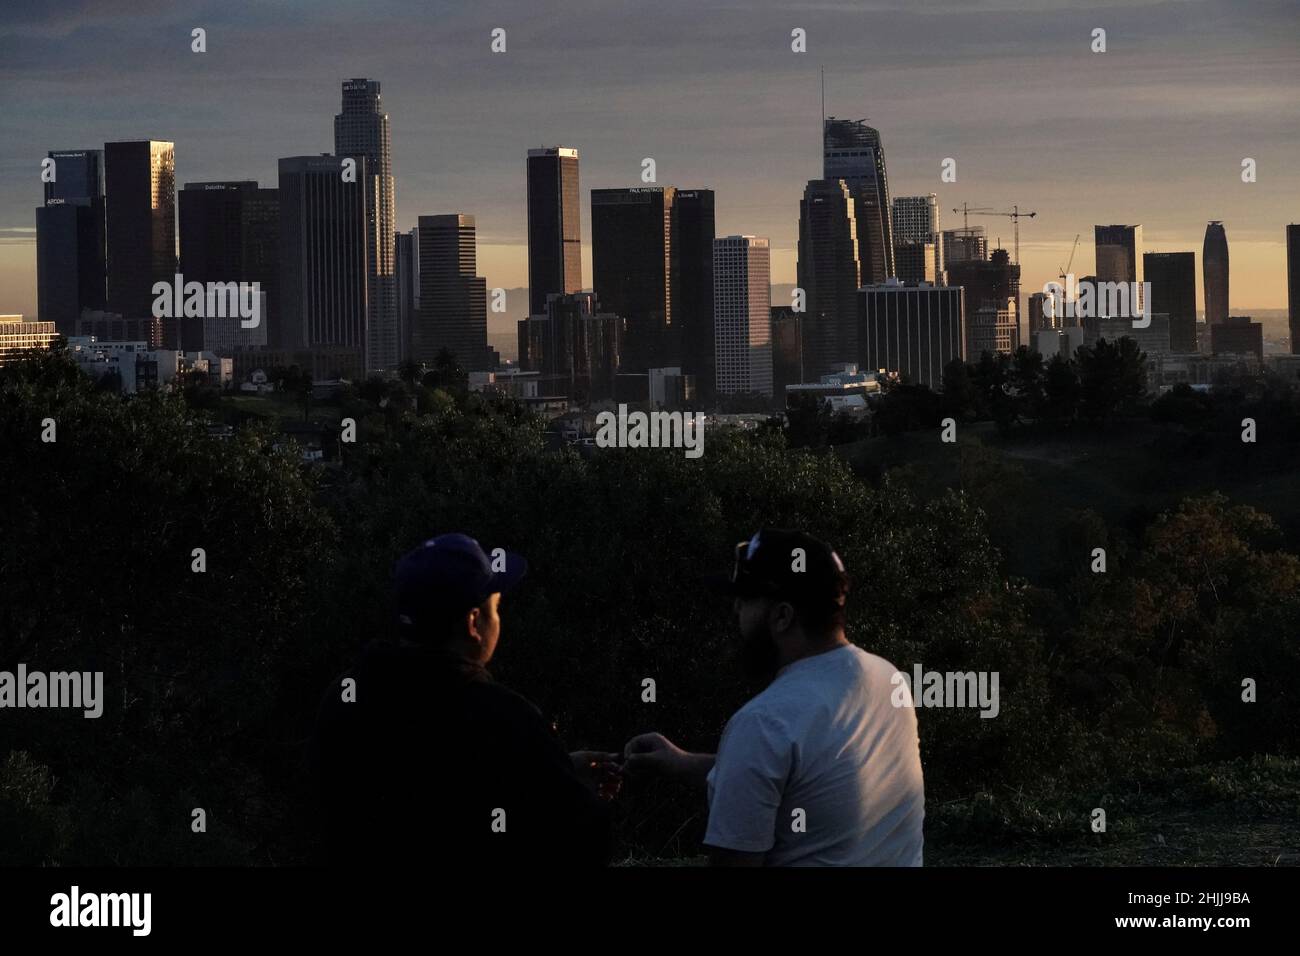 Two people smoke marijuana while looking at the downtown L.A. skyline, ahead of Super Bowl LVI, during sunset at Angels Point, Elysian Park in Los Angeles, California, U.S., January 29, 2022.  REUTERS/Bing Guan Stock Photo